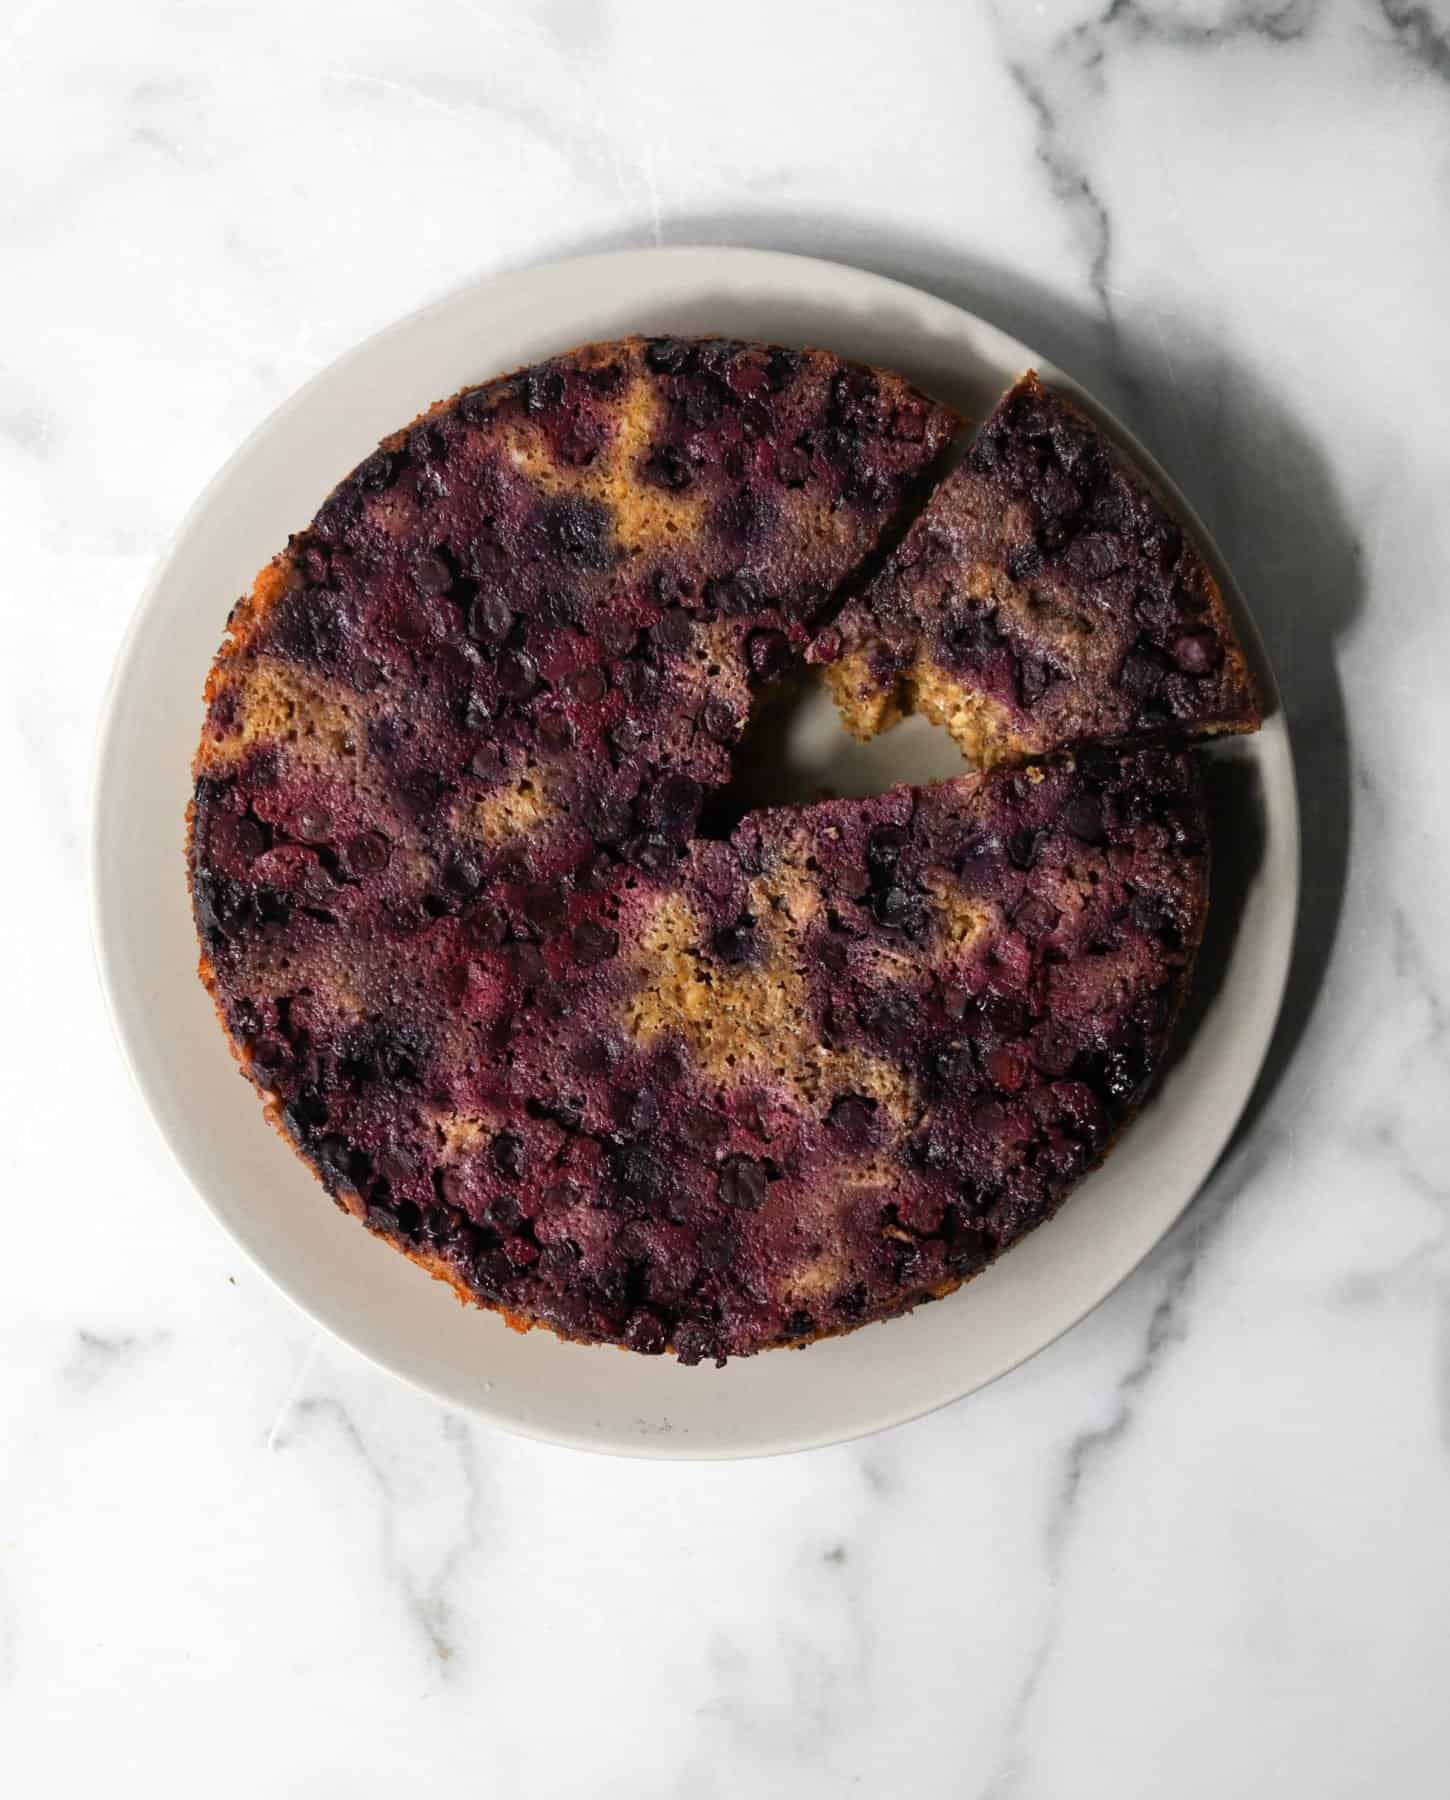 Blueberry upside down cake on a grey plate